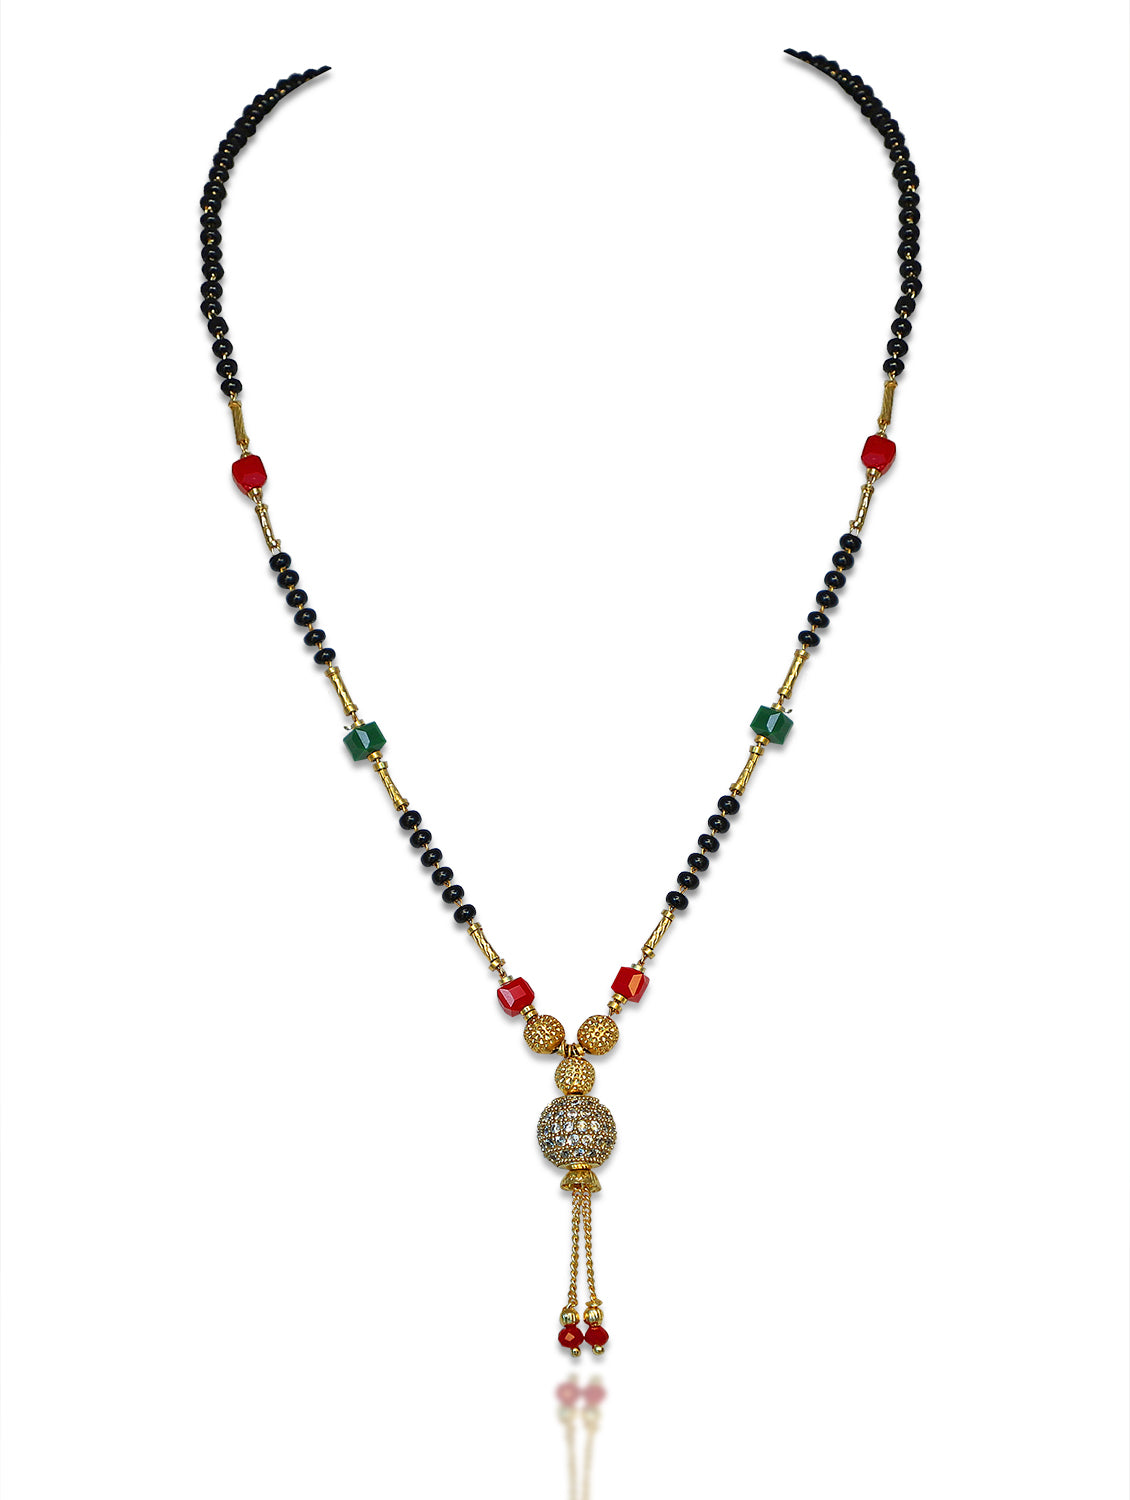 Short Mangalsutra Designs Ball Shape AD Pendant Gold Plated Red Green Beads with Latkan (20 Inches)